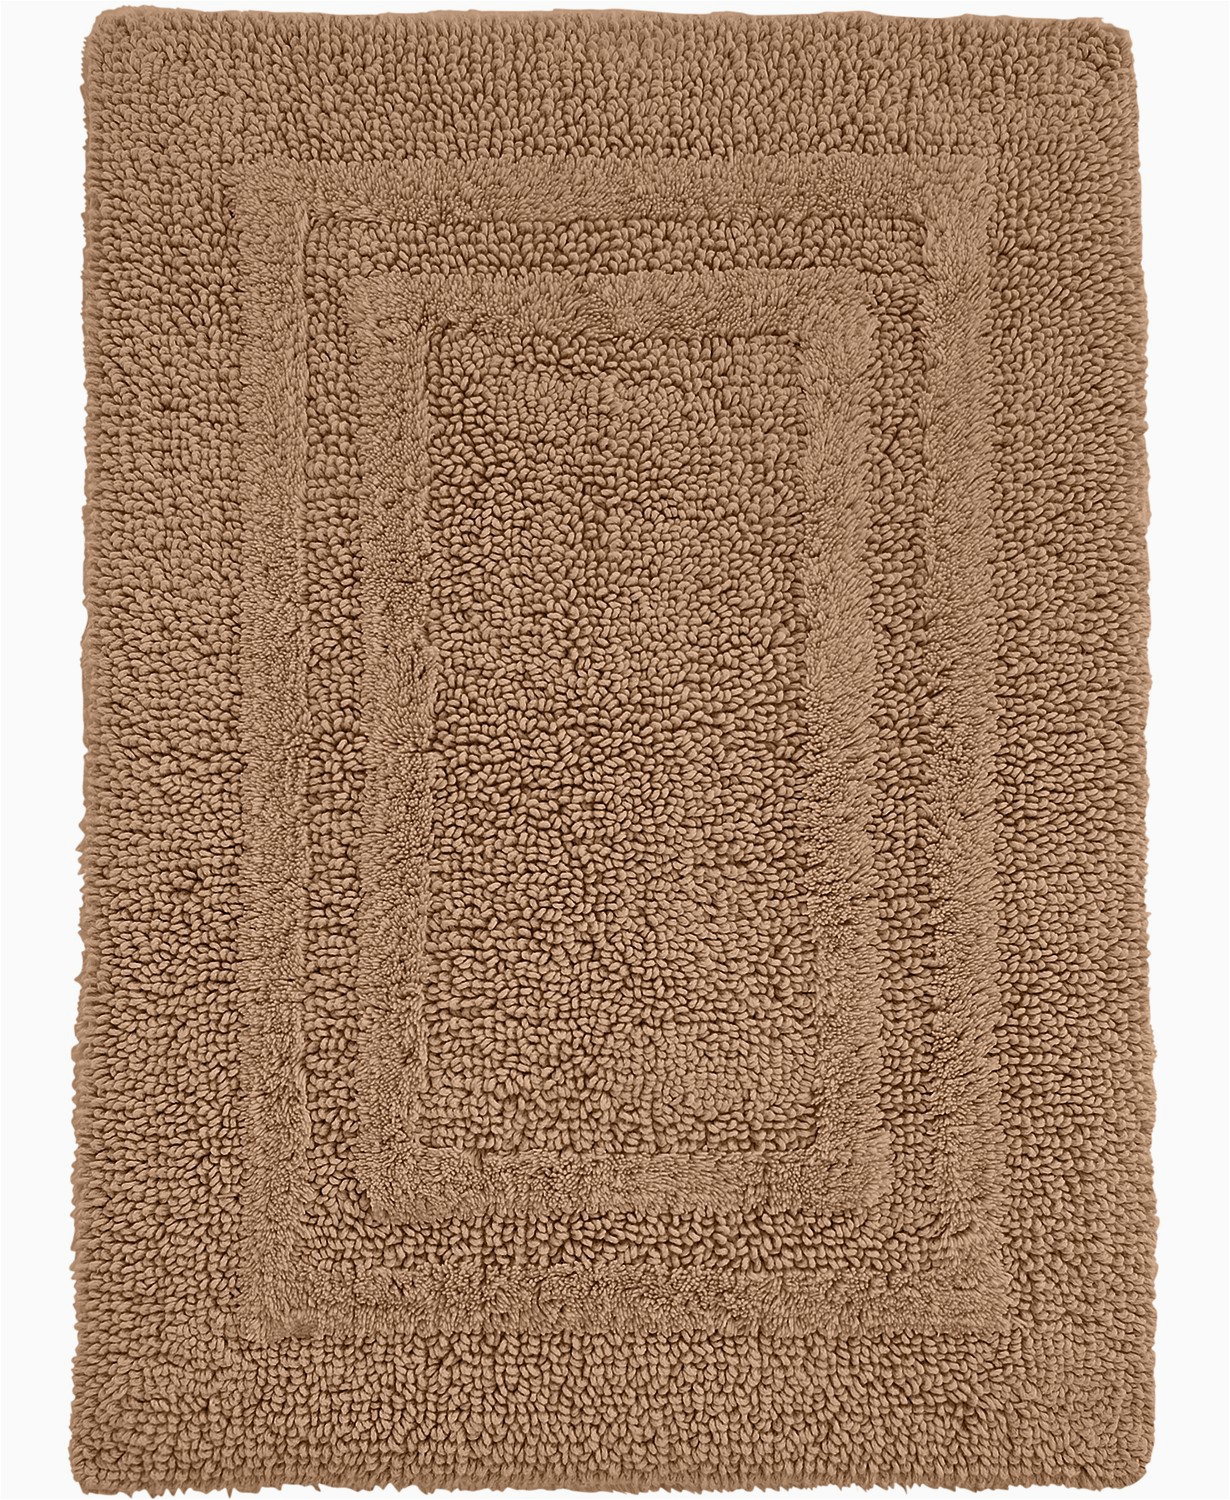 Hotel Collection Reversible Bath Rug Hotel Collection Cotton Reversible 18 Inches X 25